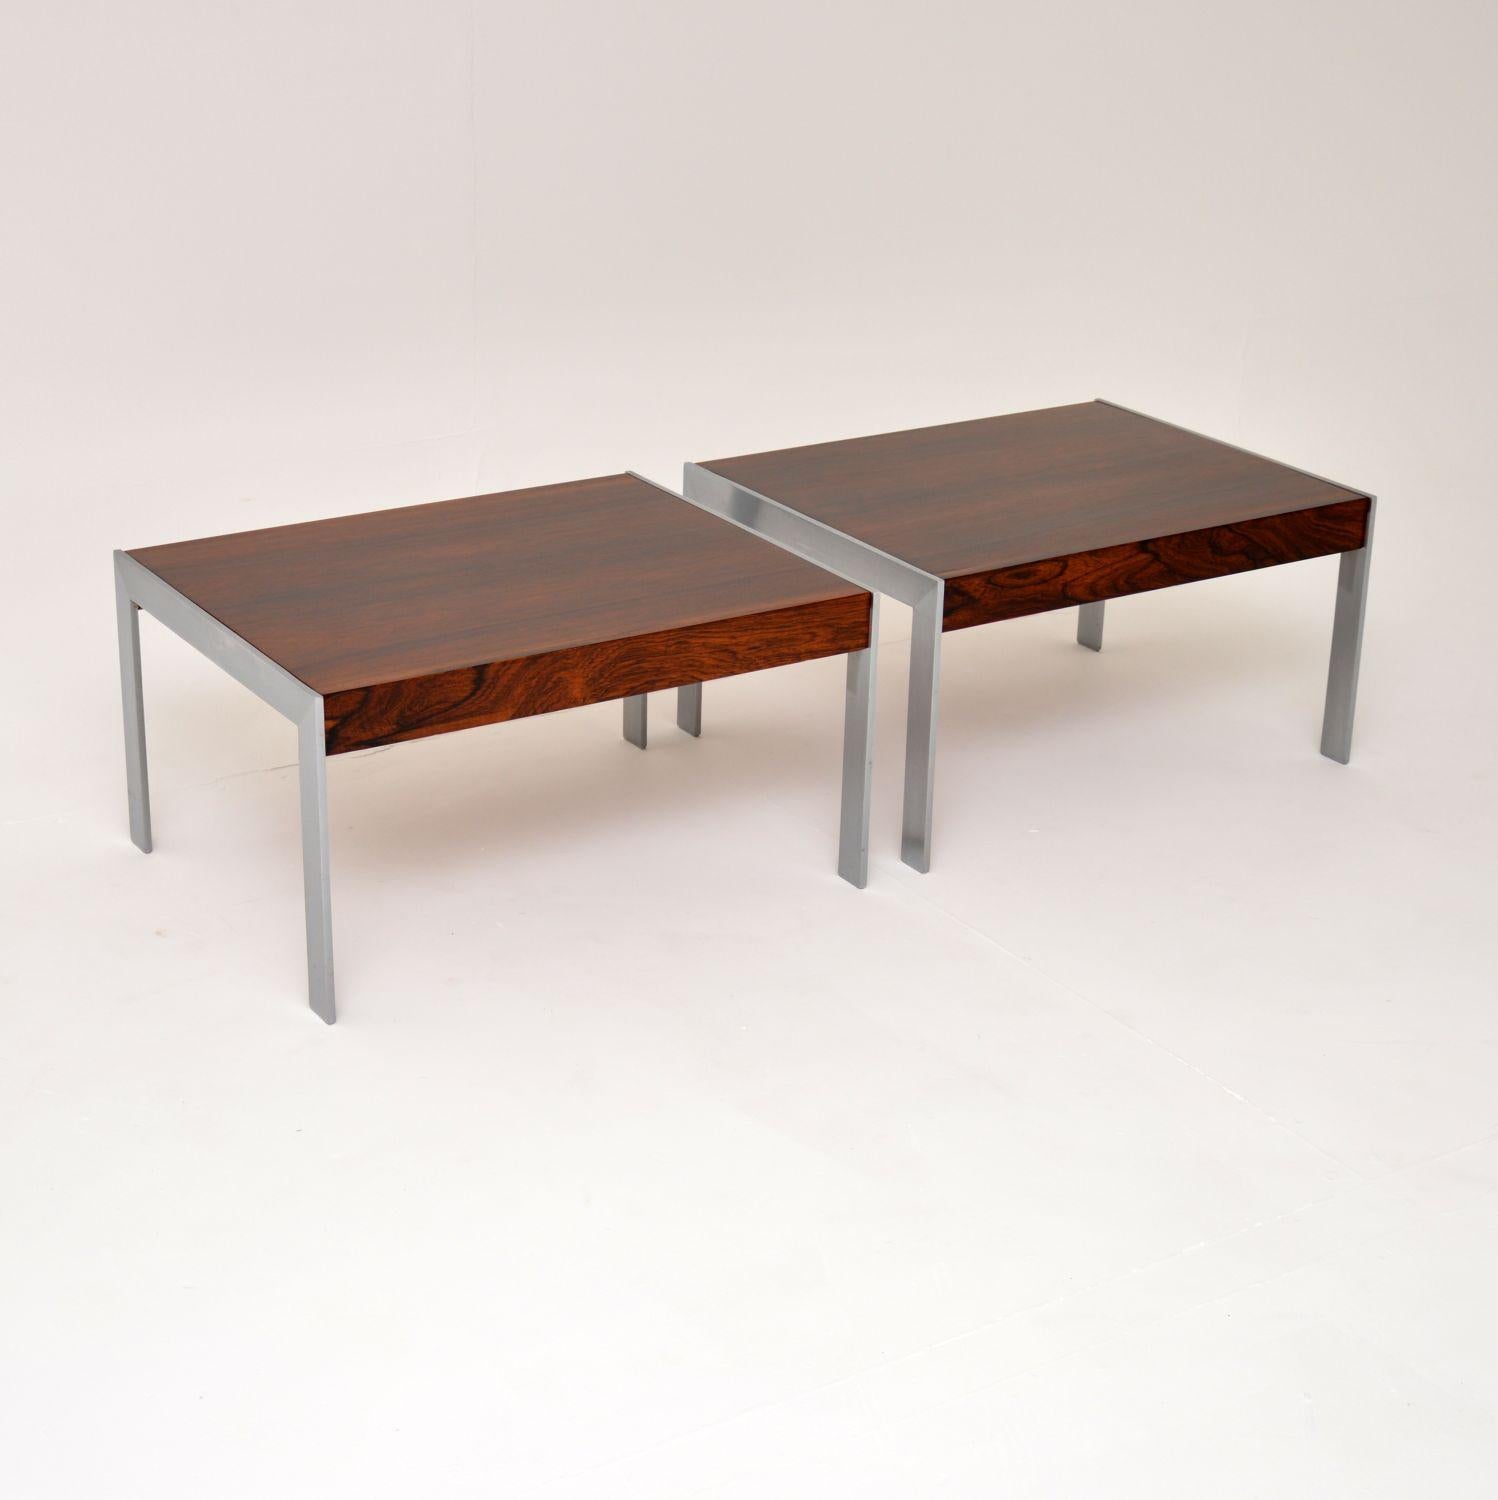 English 1970's Pair of Wood & Chrome Side Tables by Merrow Associates